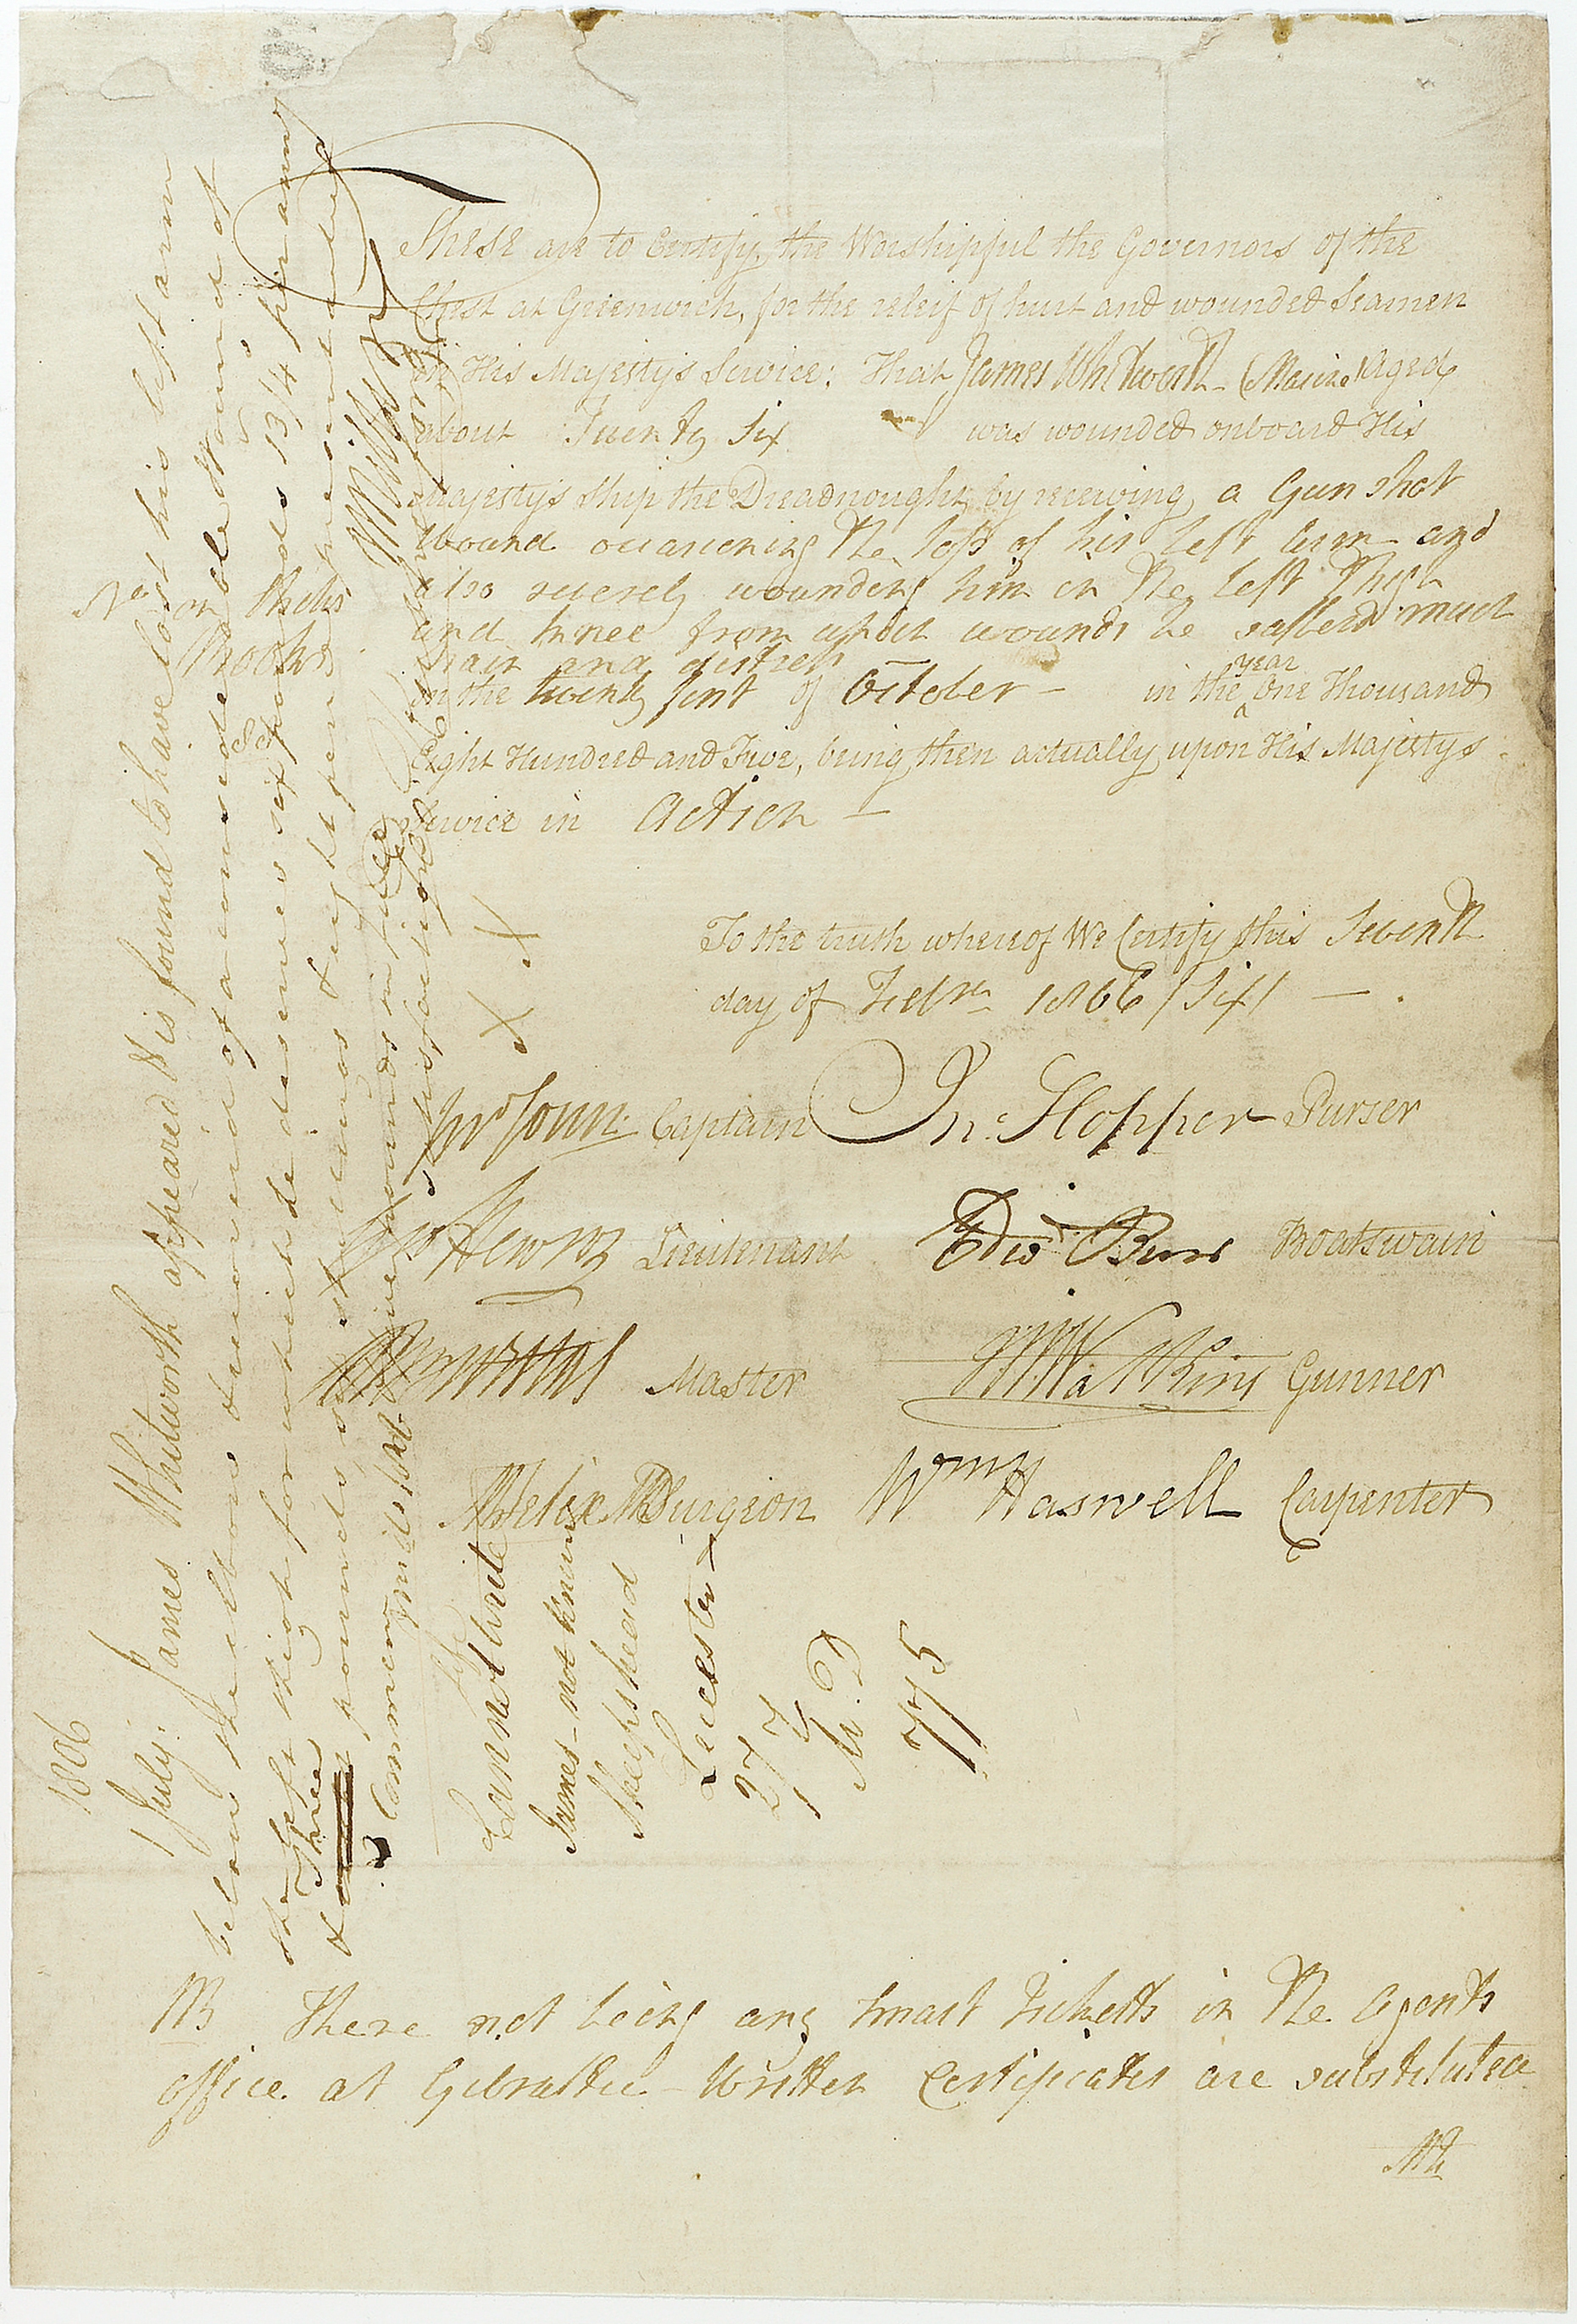 NELSON'S NAVY &#8211; WOUND CERTIFICATES Manuscript wound certificate, signed by Captain John Con...